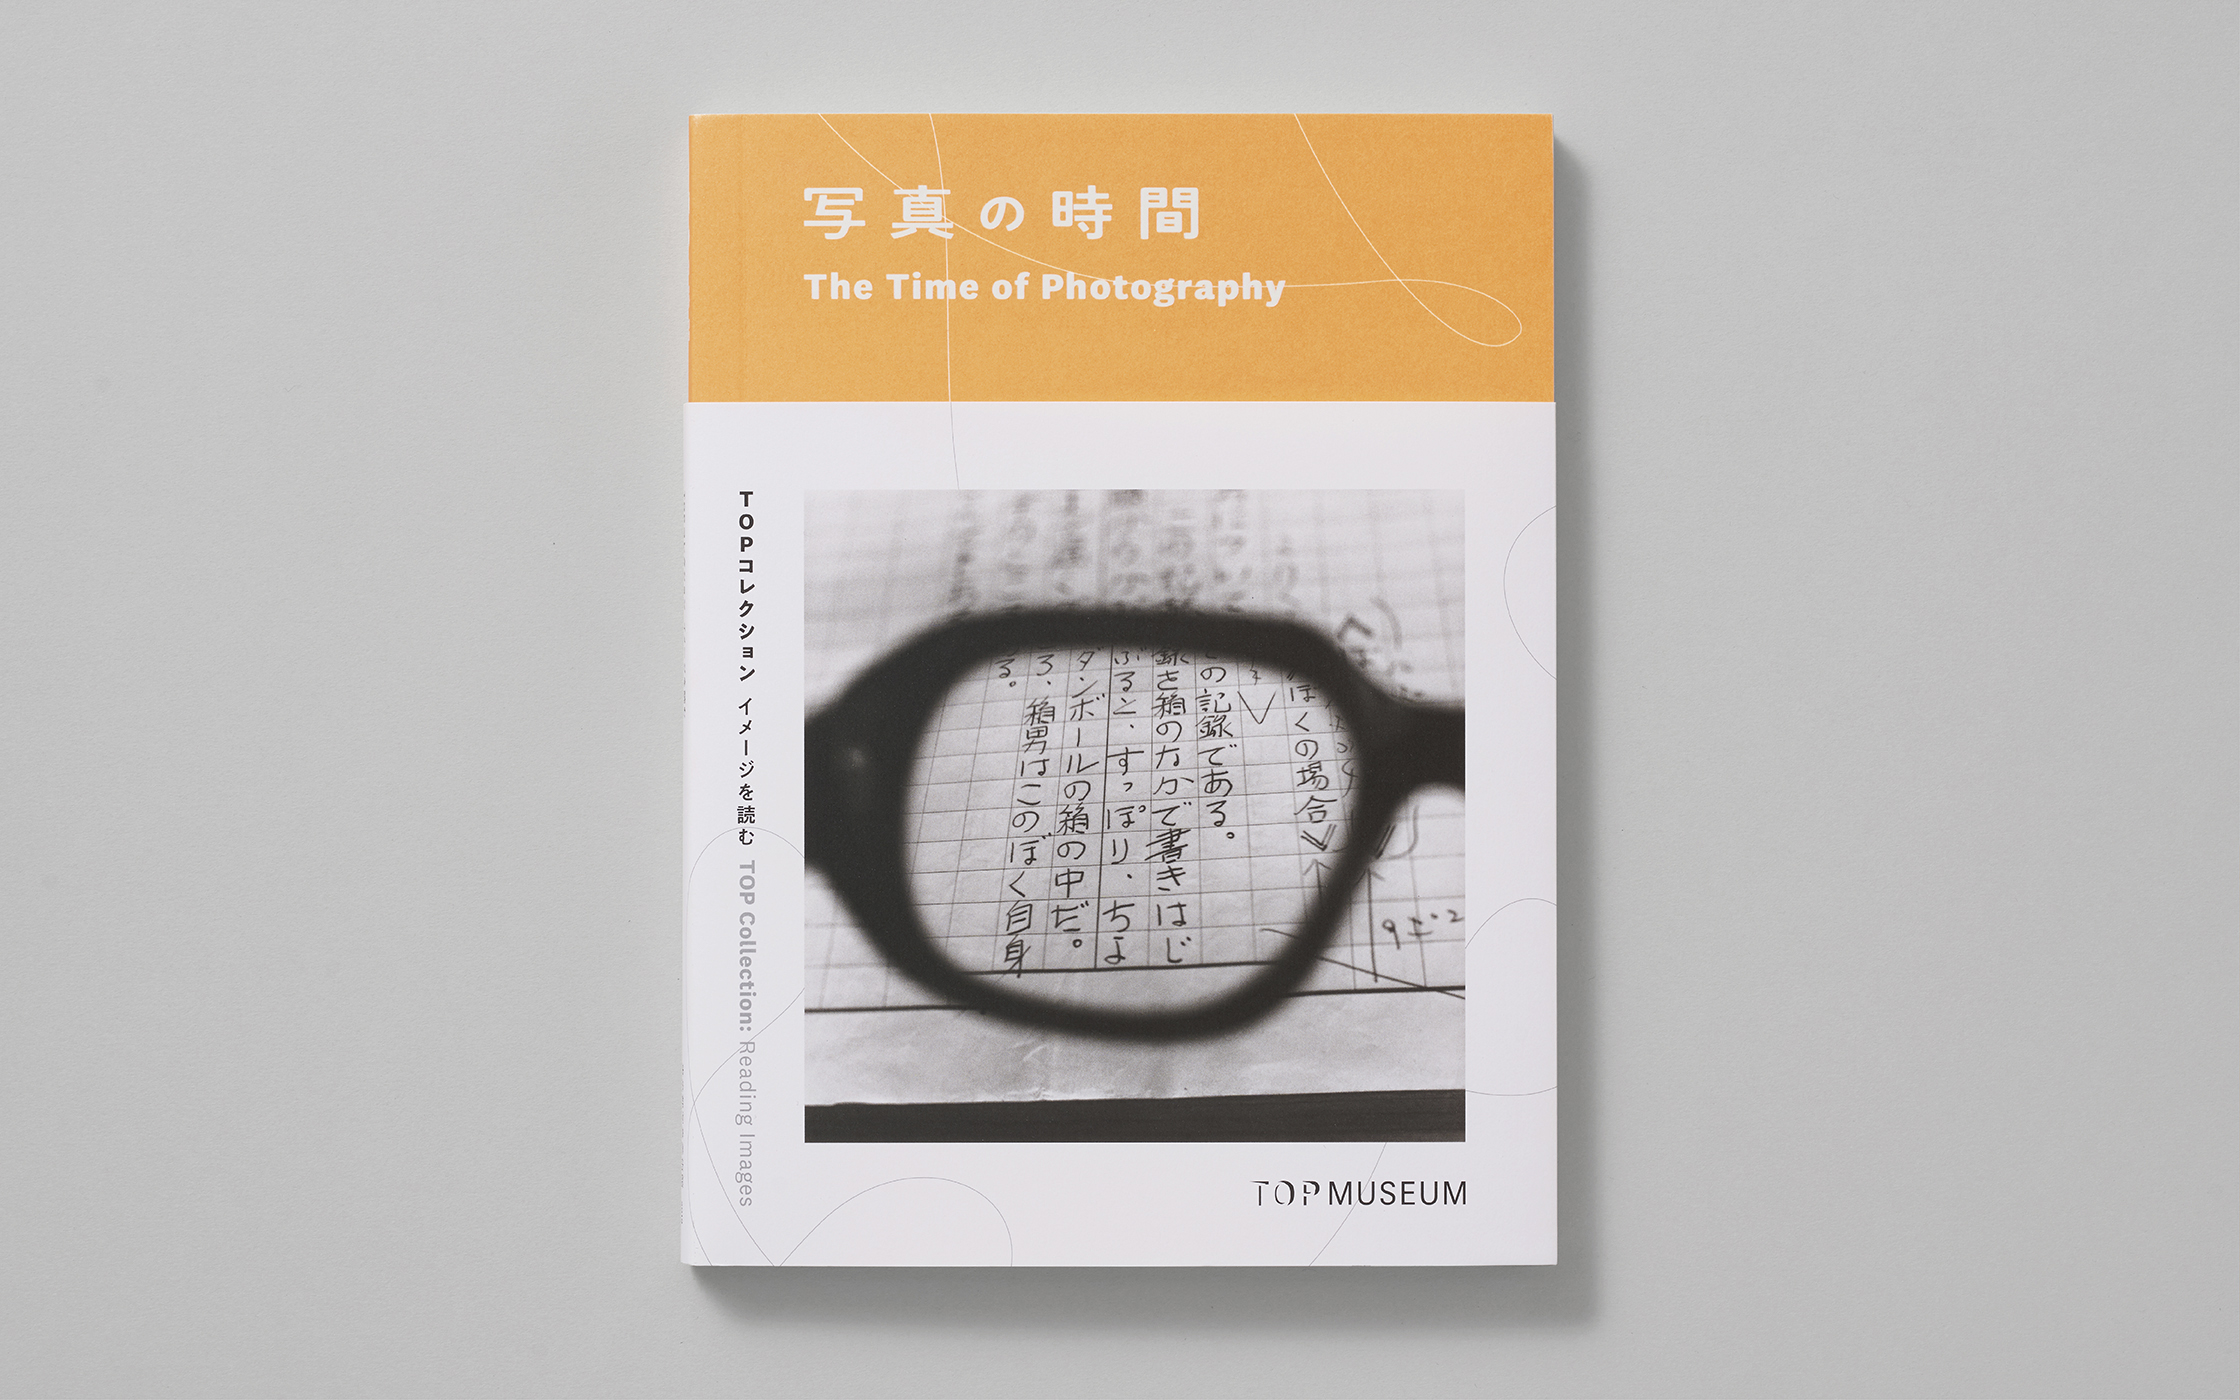 TOP CollectionーReading Images: The Time of Photography